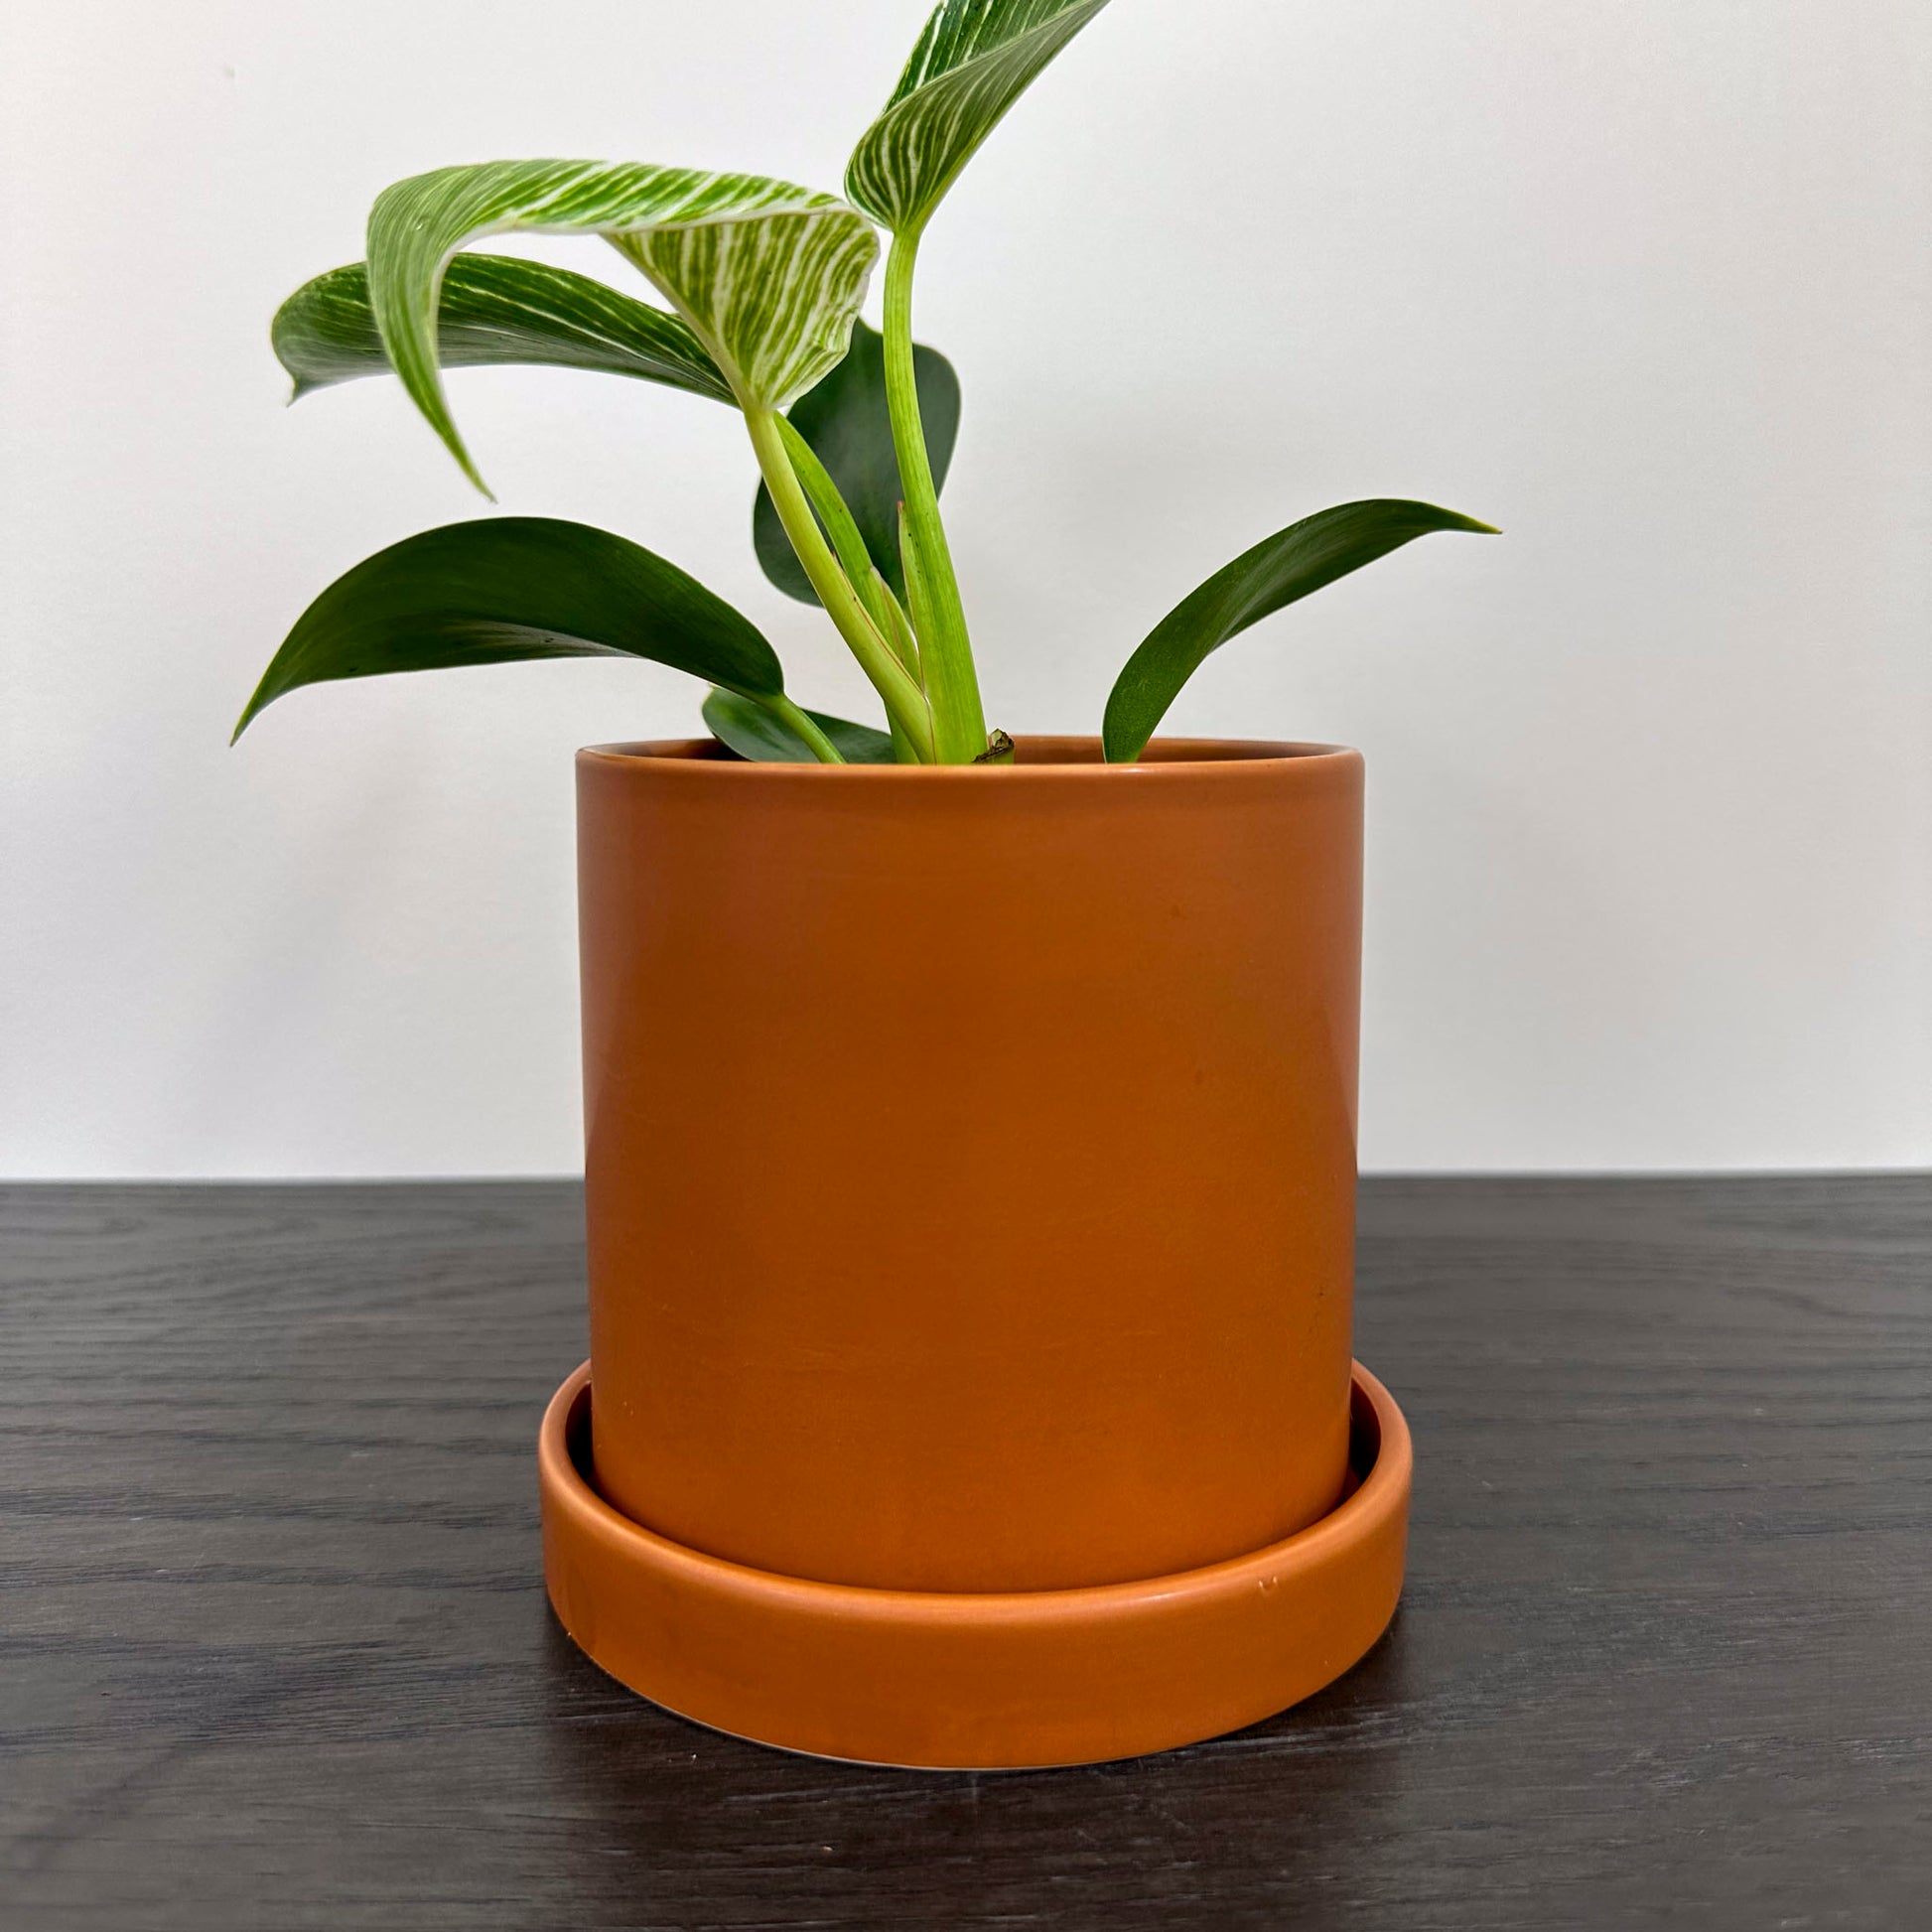 Rust ceramic planter holding a philodendron